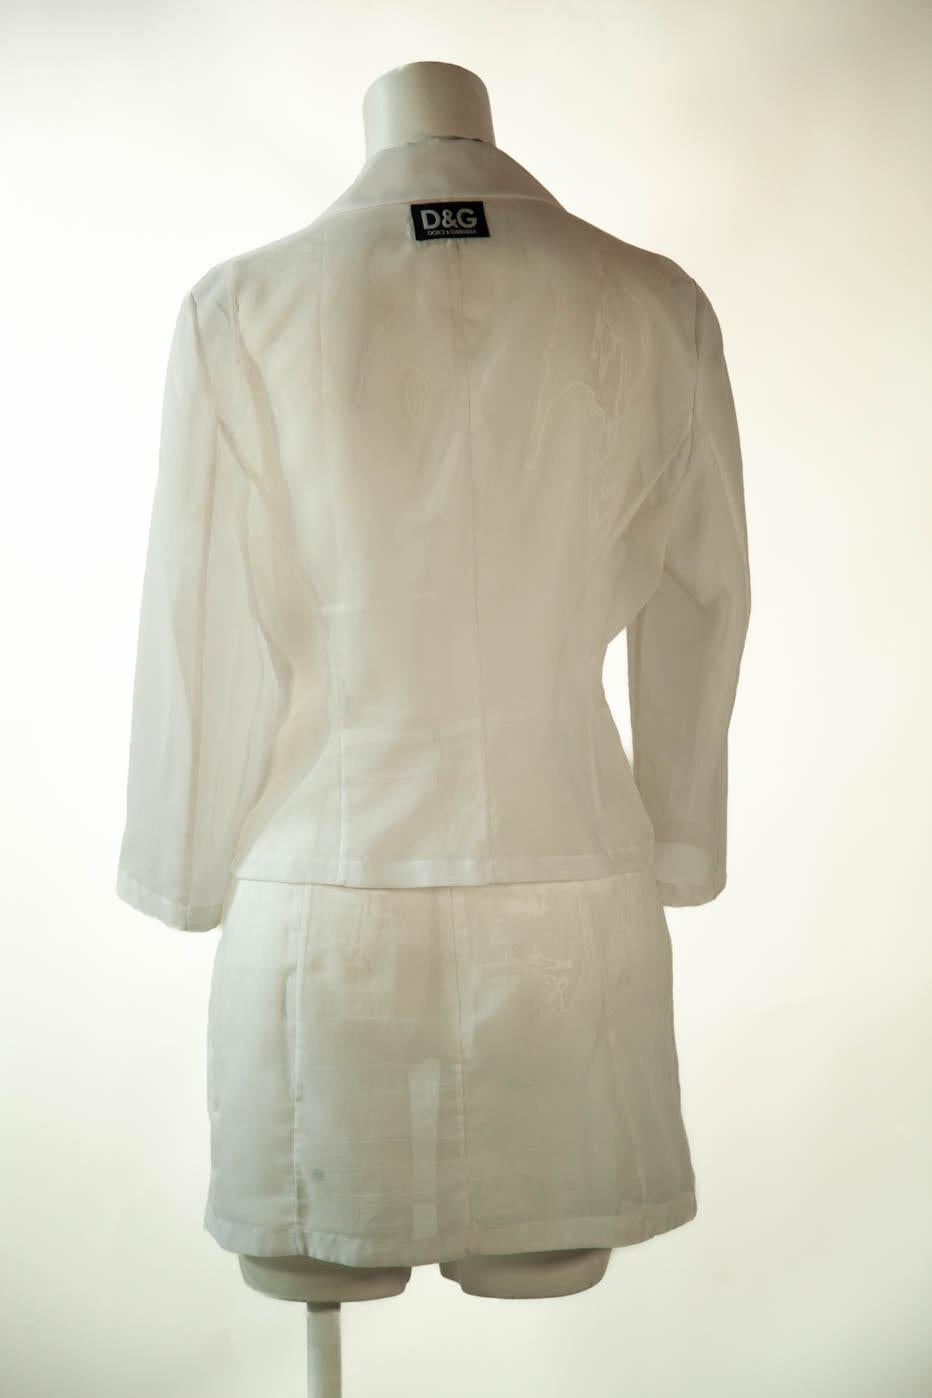 Dolce & Gabbana Translucent Organza Silk White Suit Ensemble  In Excellent Condition For Sale In Kingston, NY